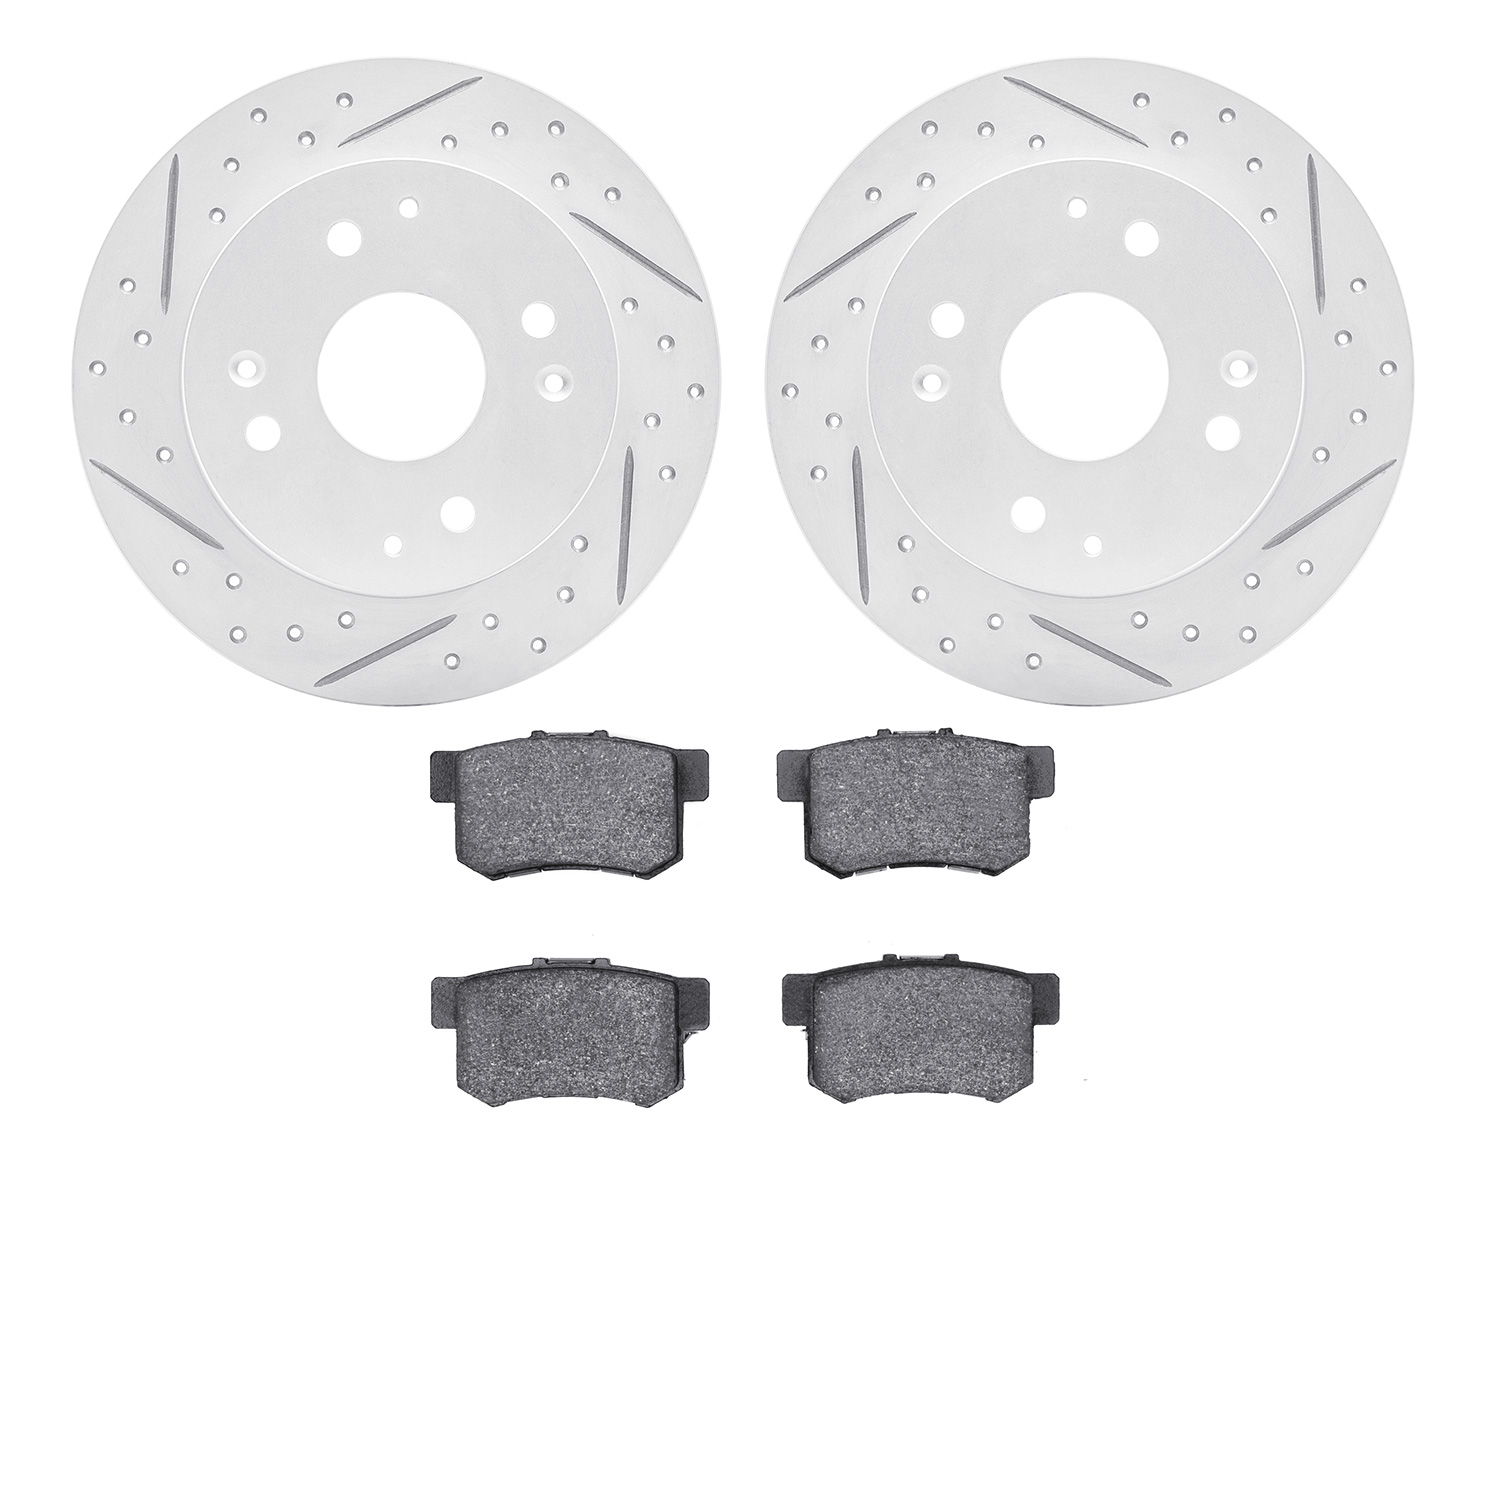 2502-59021 Geoperformance Drilled/Slotted Rotors w/5000 Advanced Brake Pads Kit, 1998-2002 Acura/Honda, Position: Rear